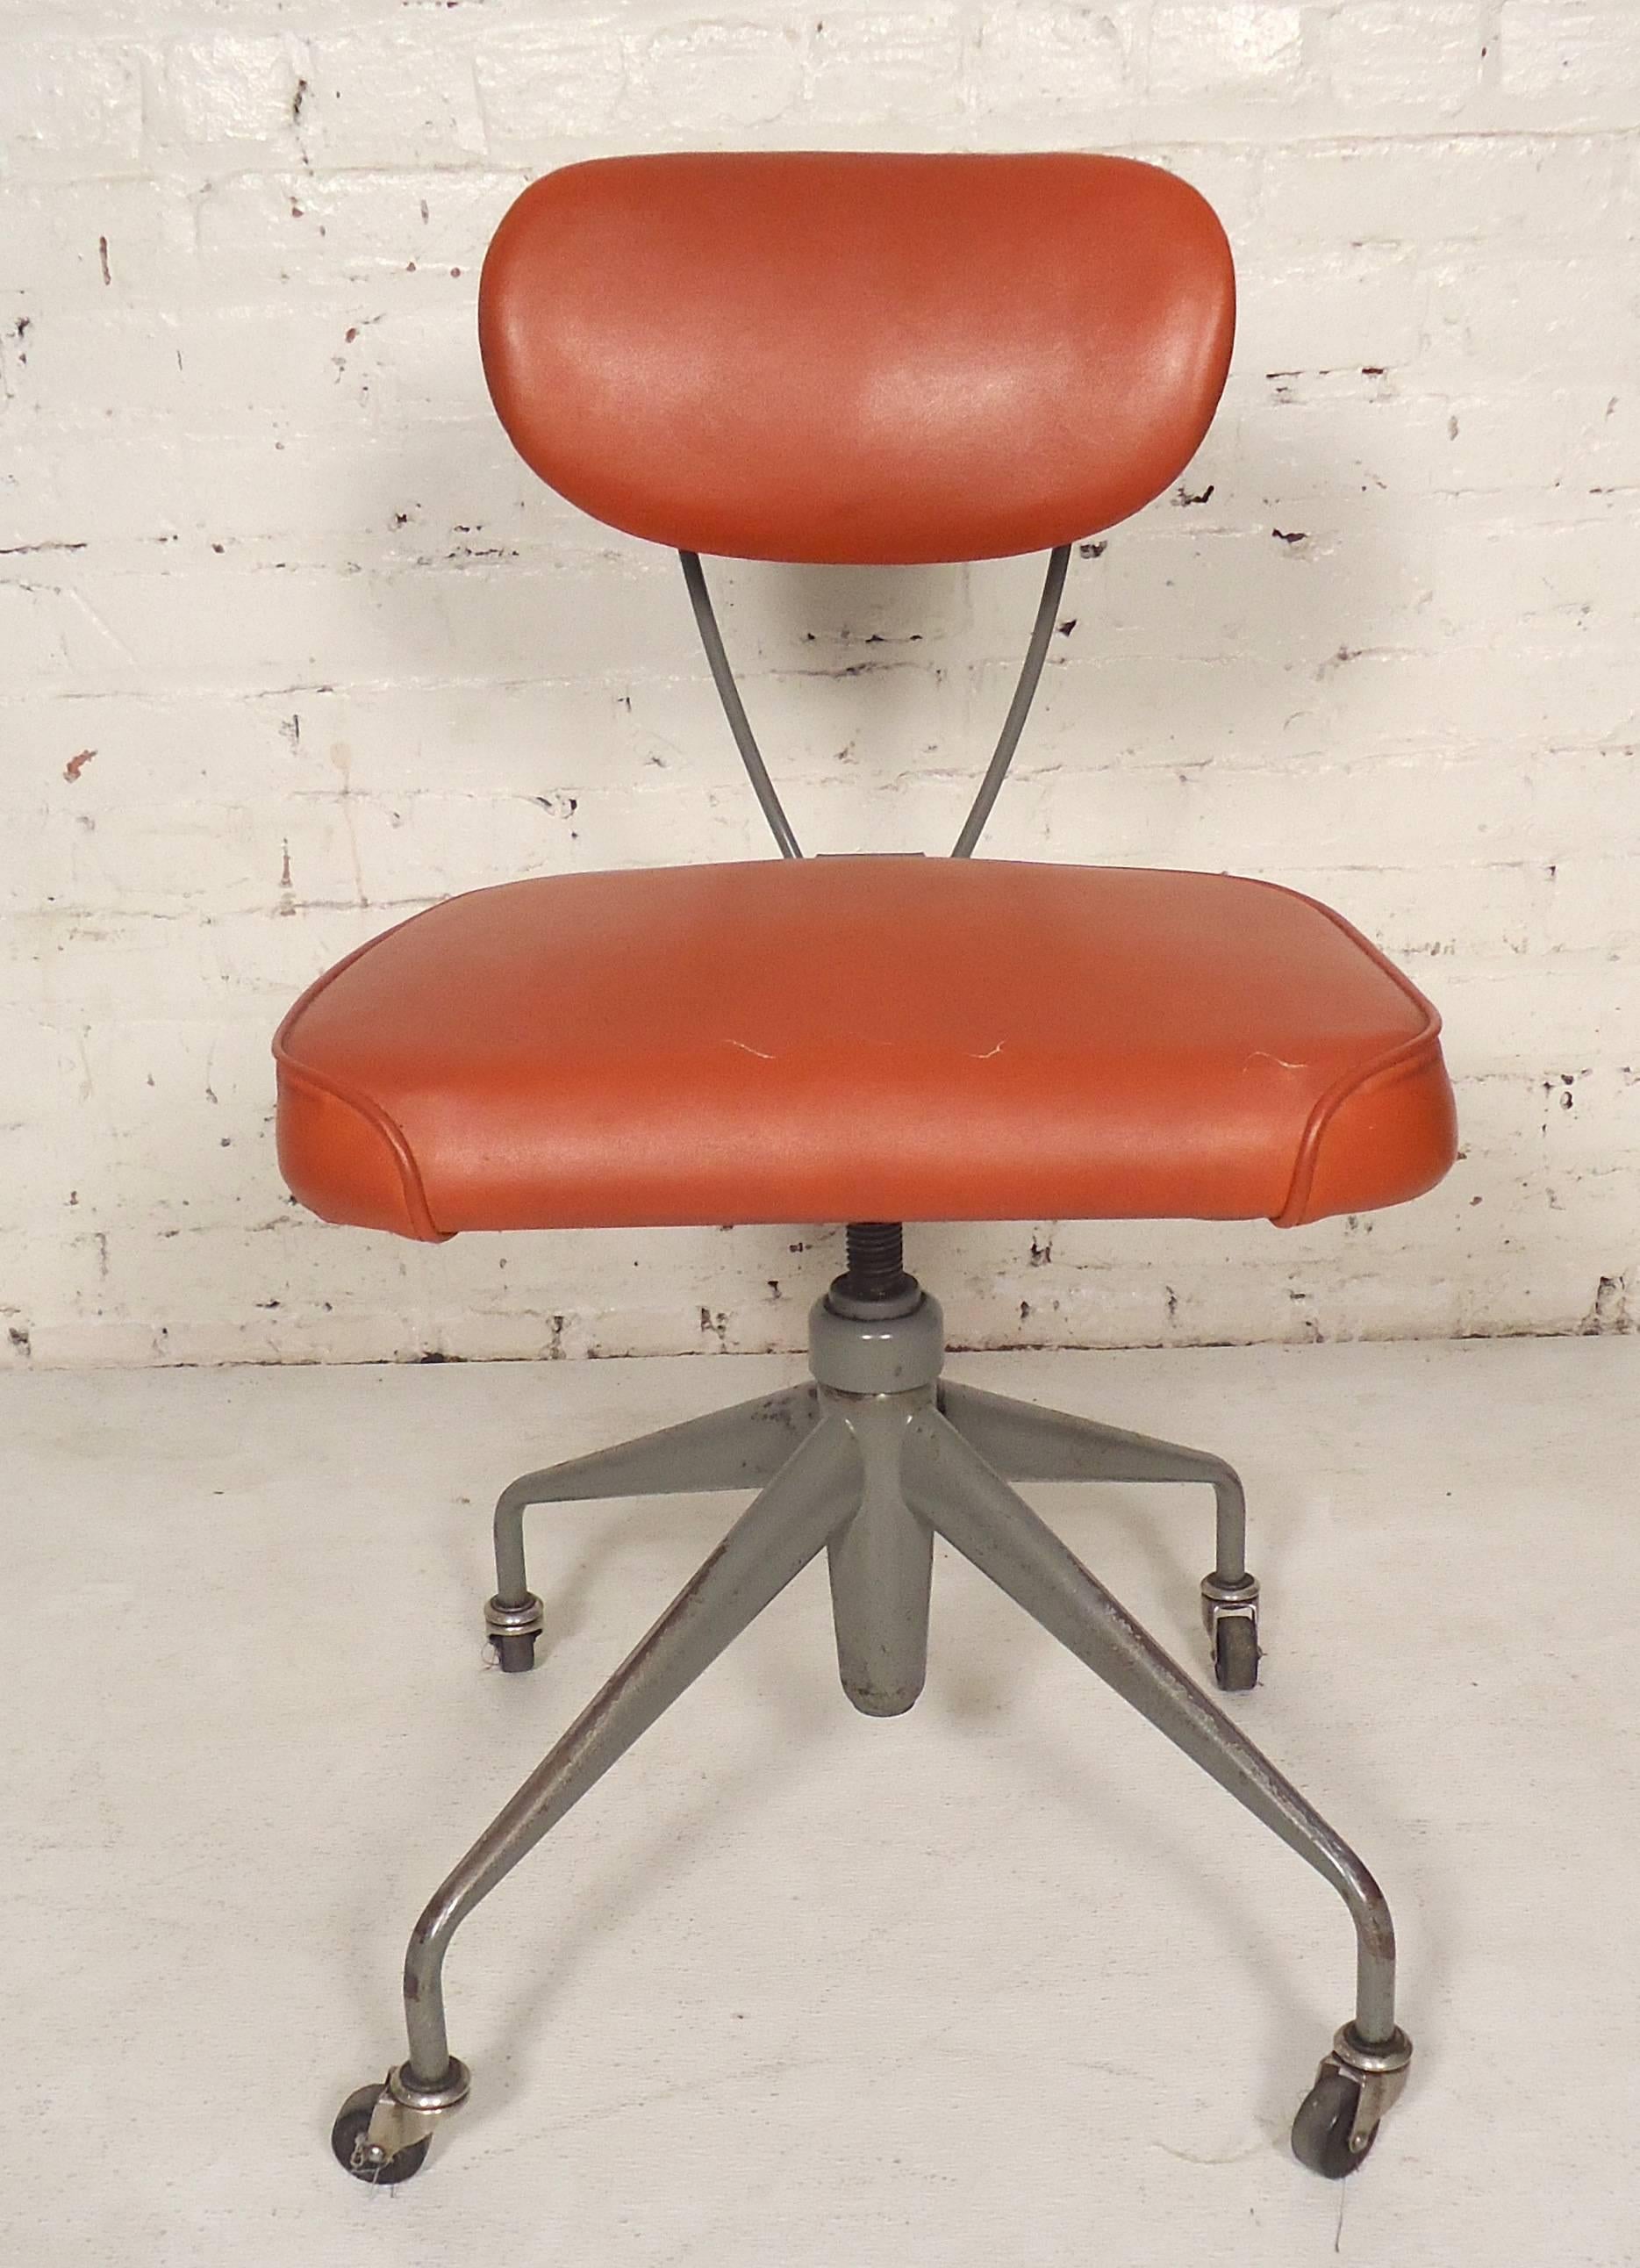 Vintage rolling chair with vinyl fabric and unusual back supports.

(Please confirm item location - NY or NJ - with dealer).
    